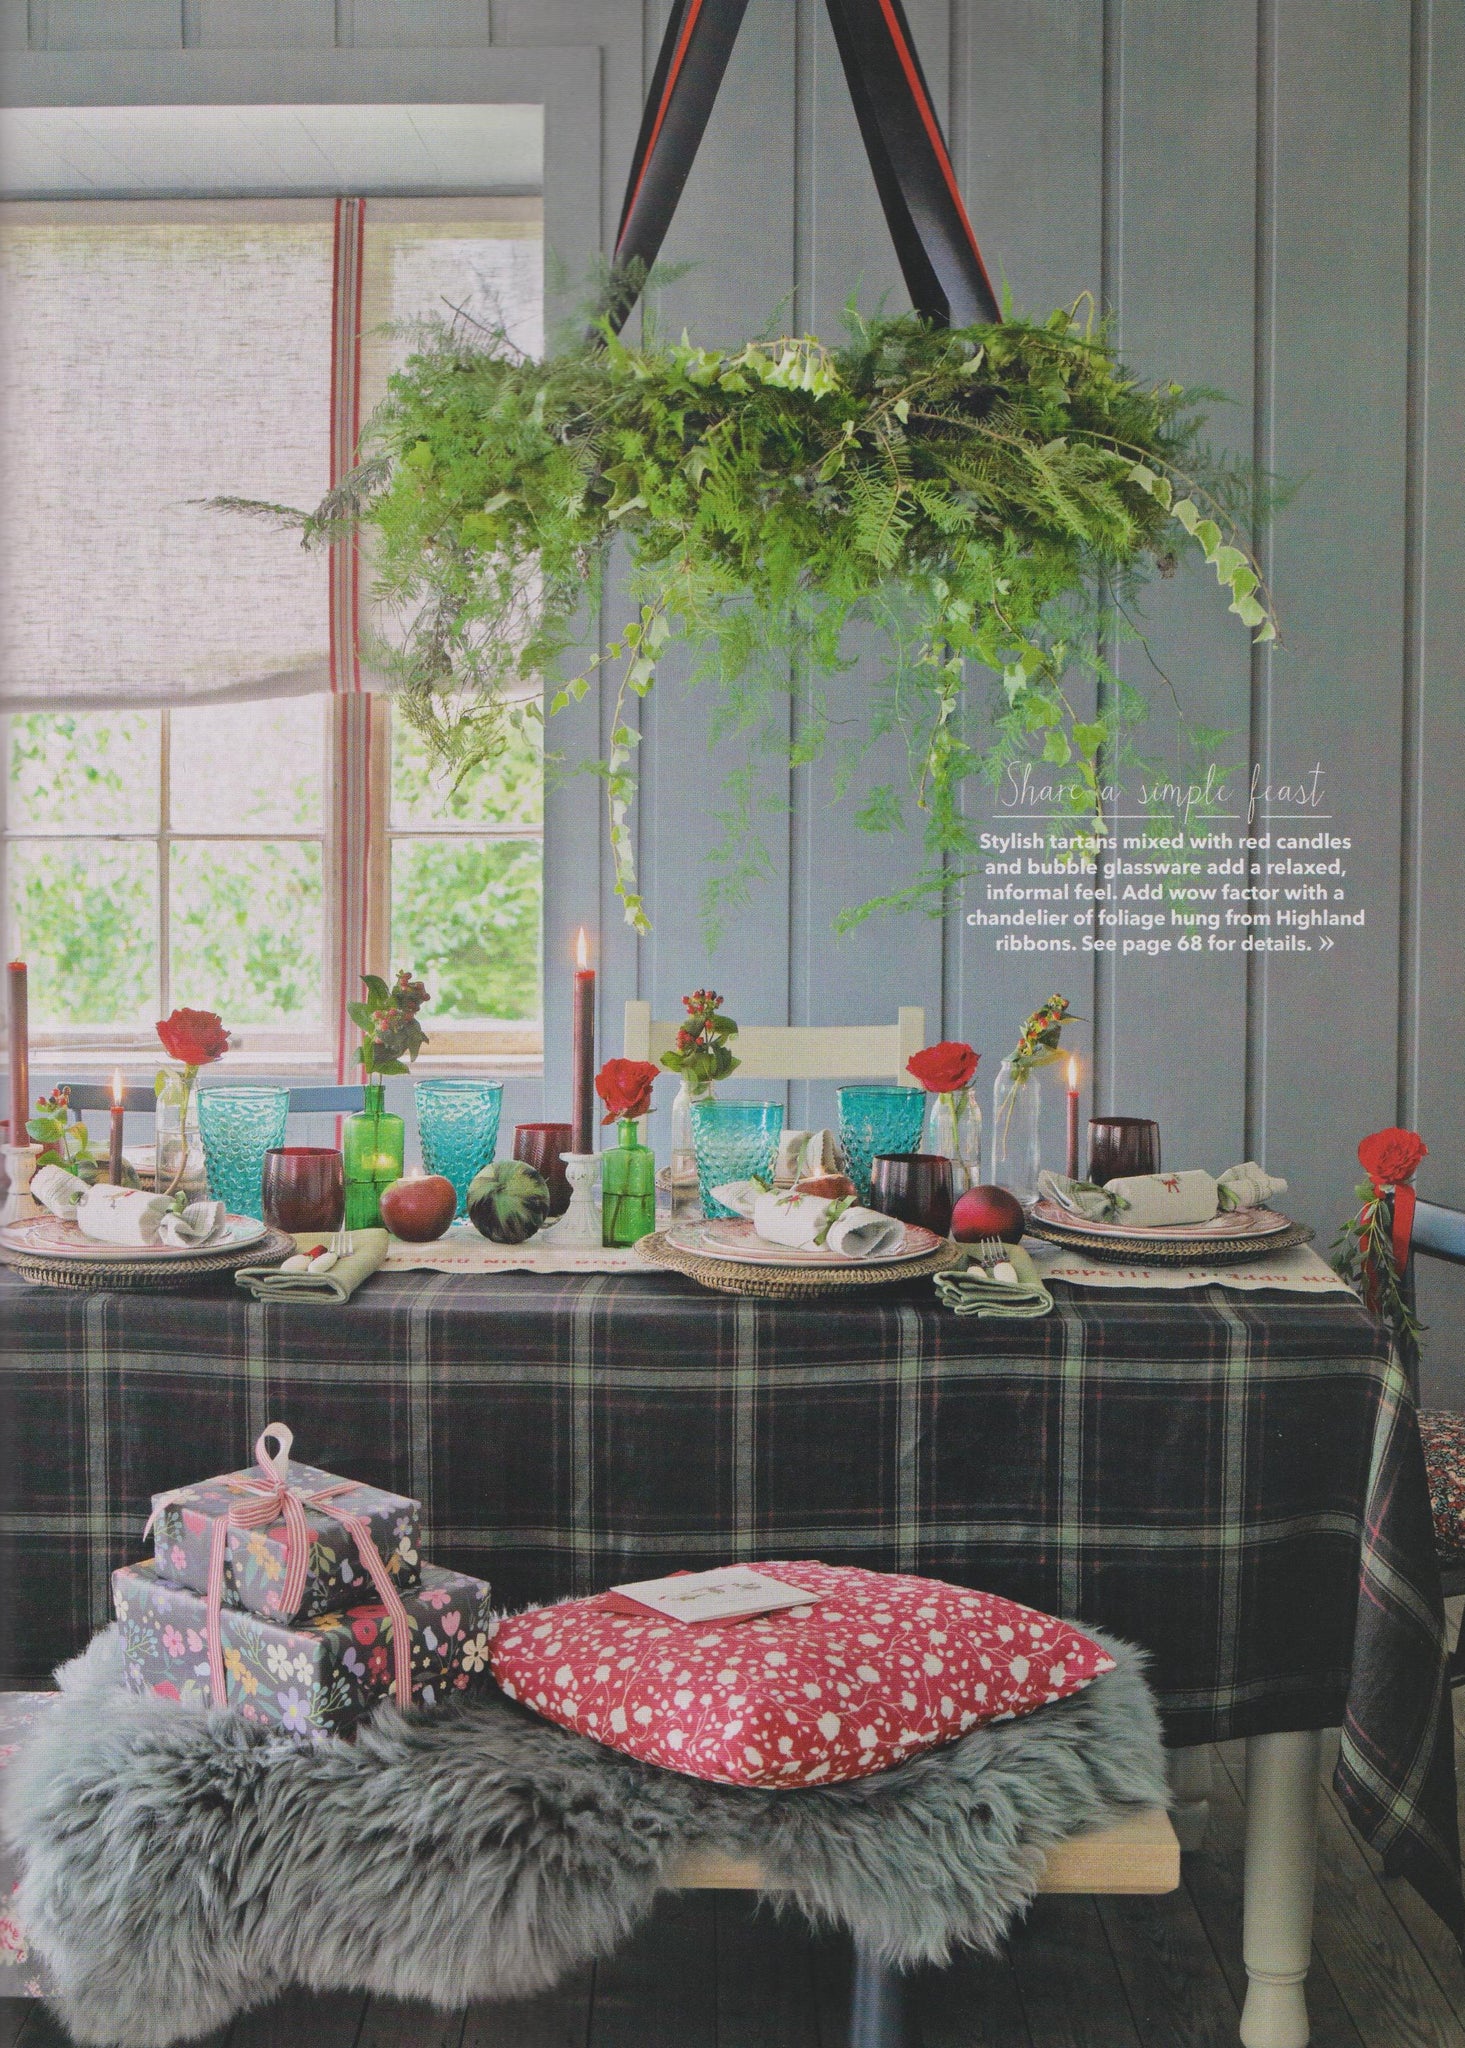 Woodland reusable Christmas crackers by Kate Sproston Design as featured in Country Homes and Interiors Magazine Dec 2015